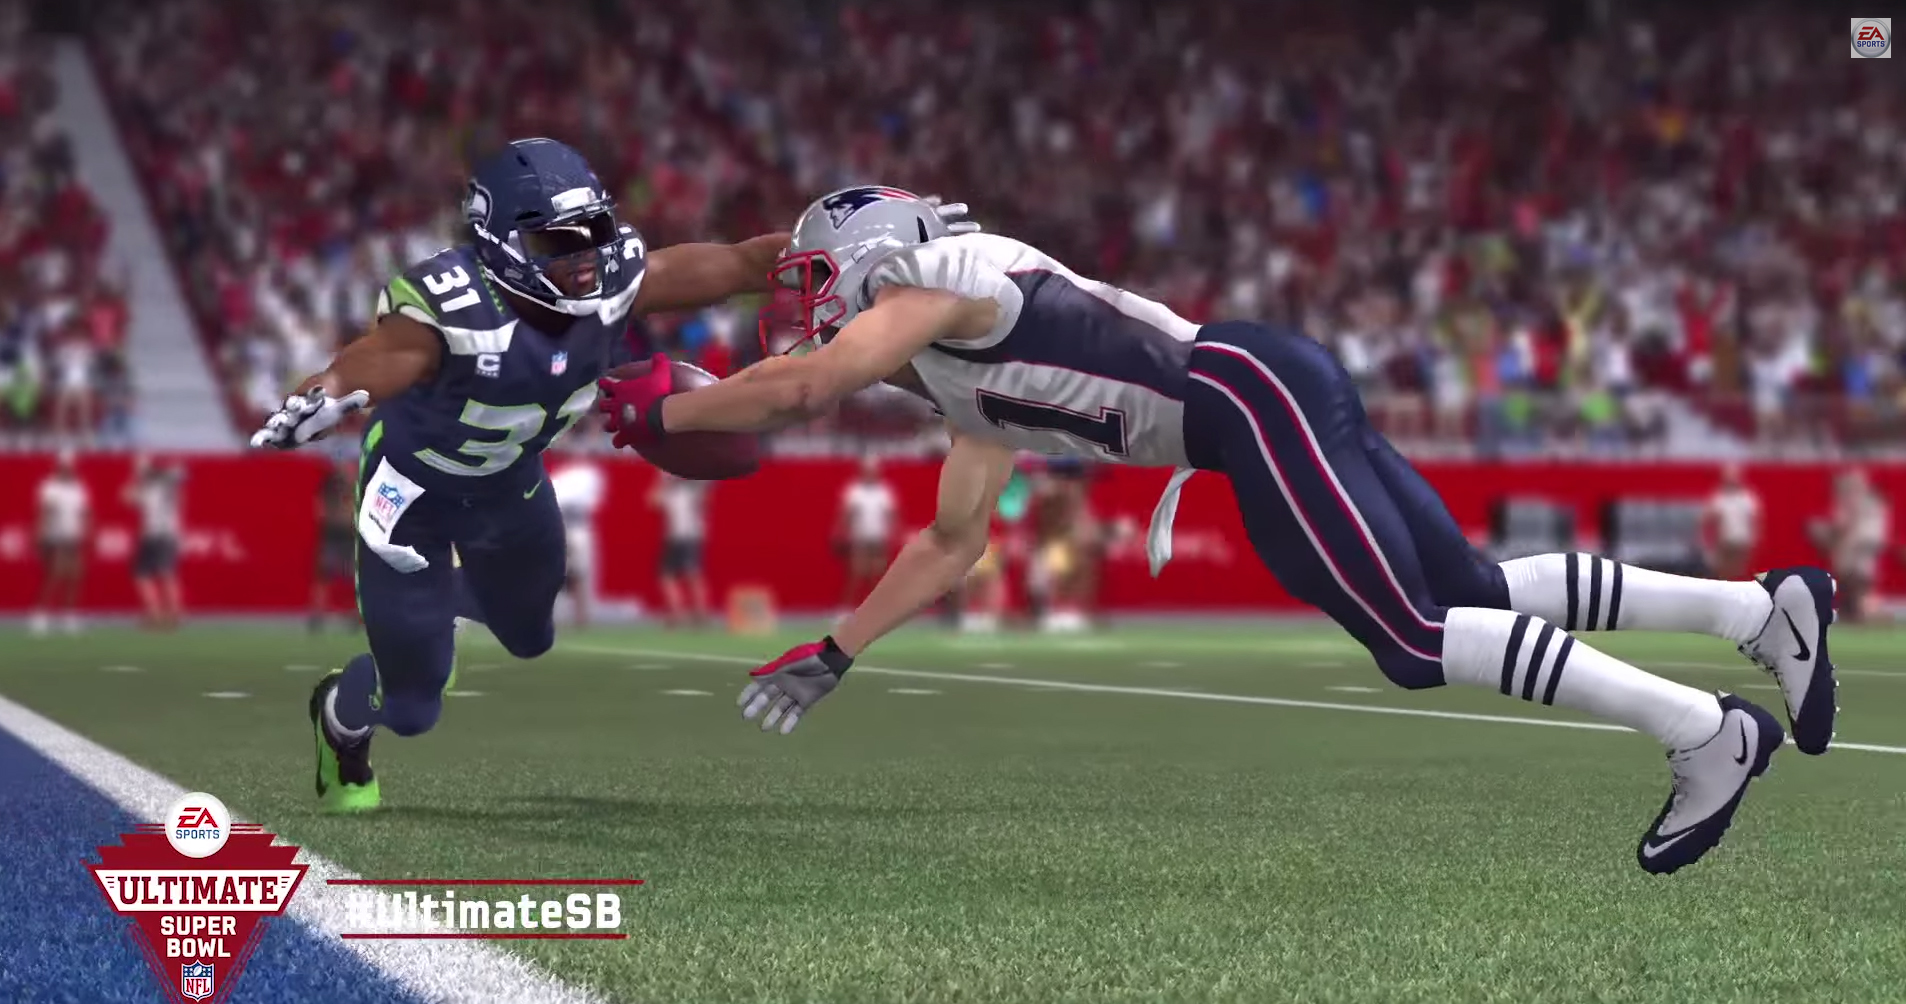 PHOTO: New England Patriots Julian Edelman dives for a touchdown in a still from a video game simulation published by Electronic Arts that predicted the winner of Super Bowl XLIX.